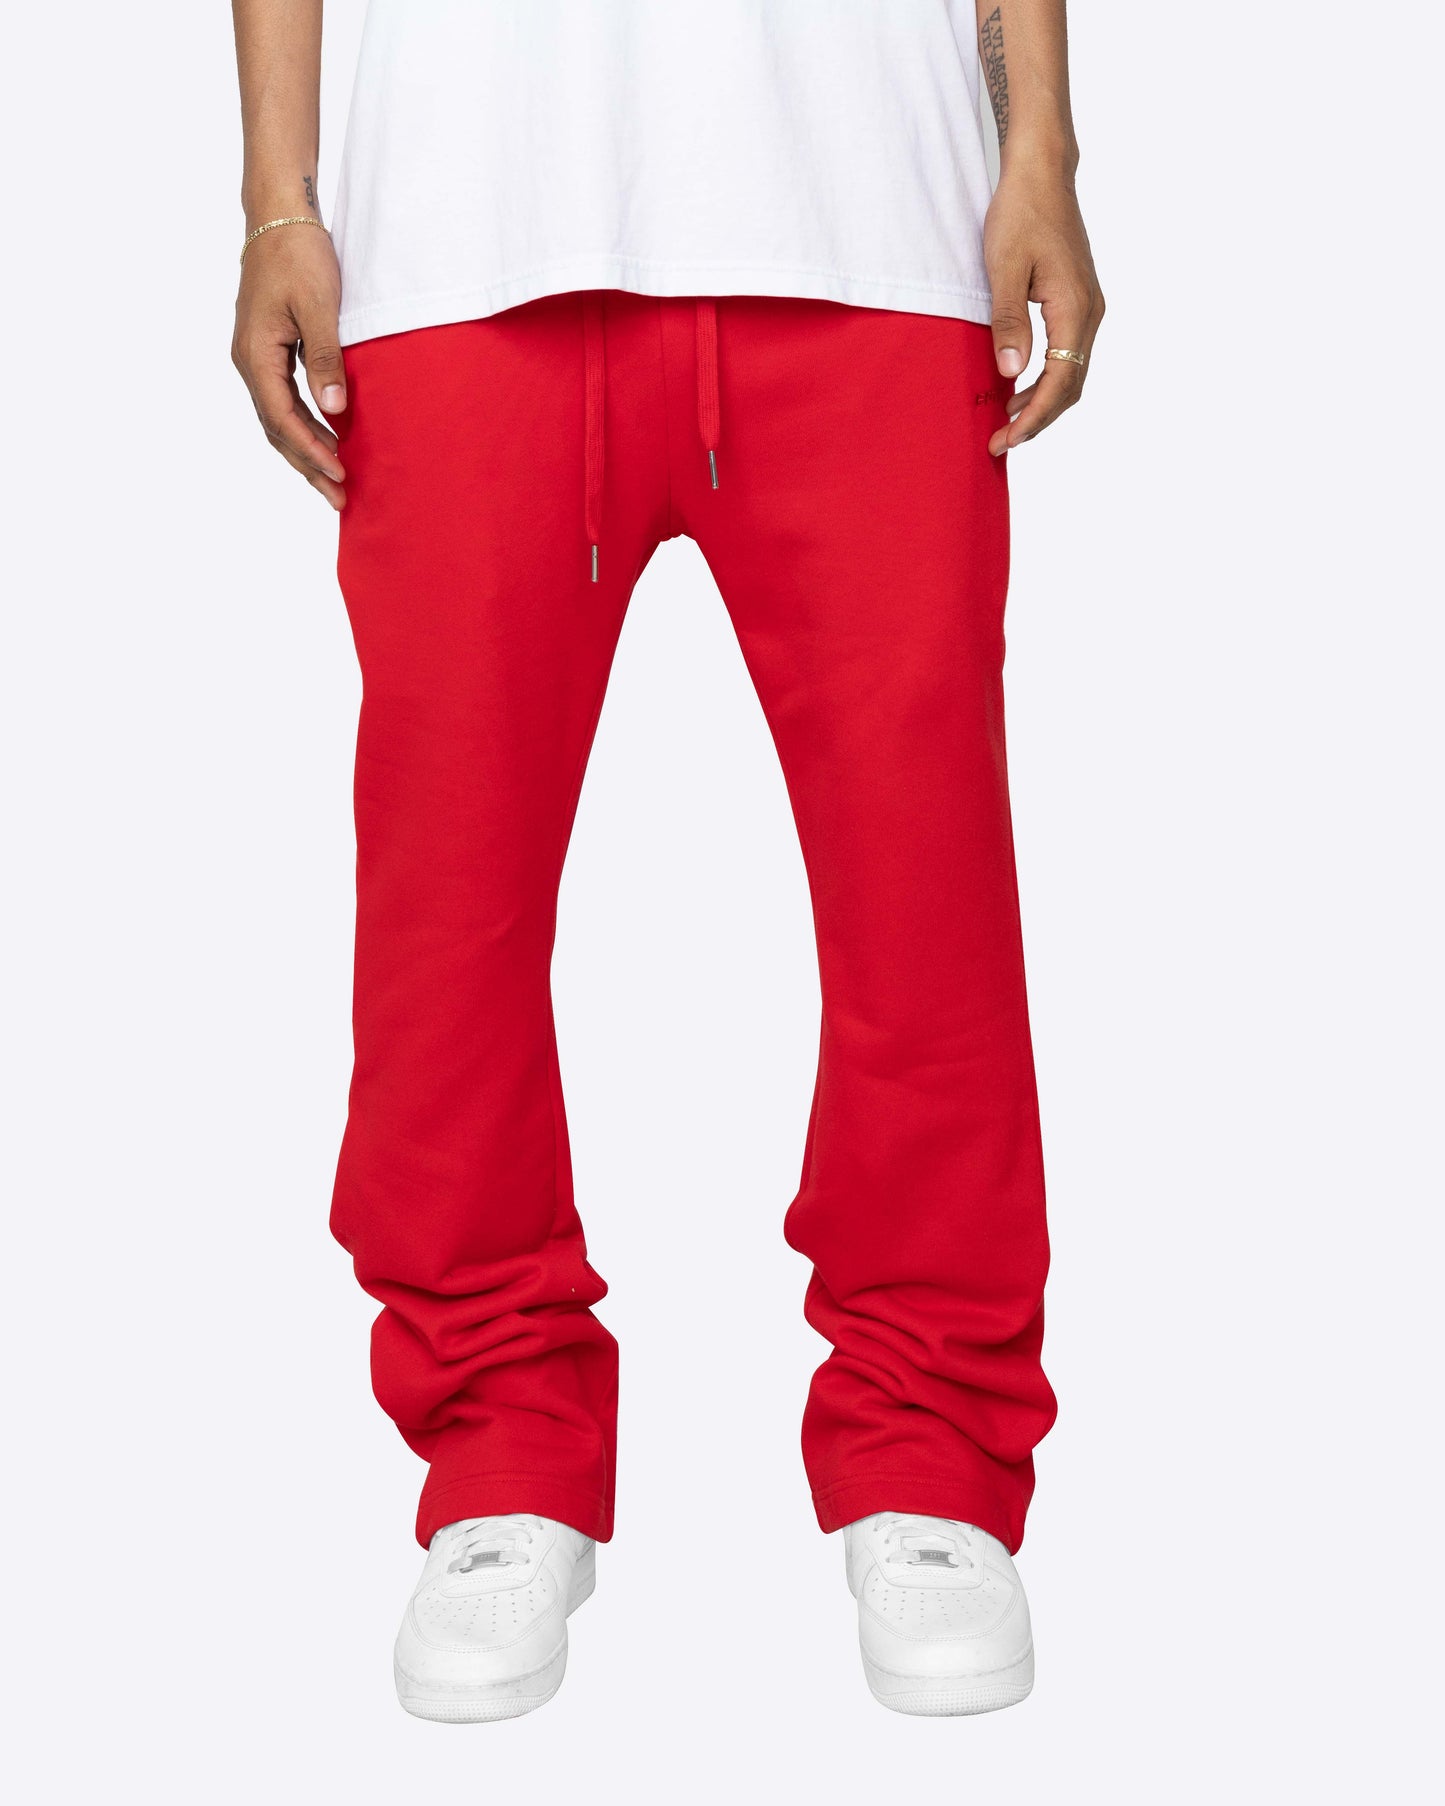 PERFECT FLARE SWEATPANTS-RED